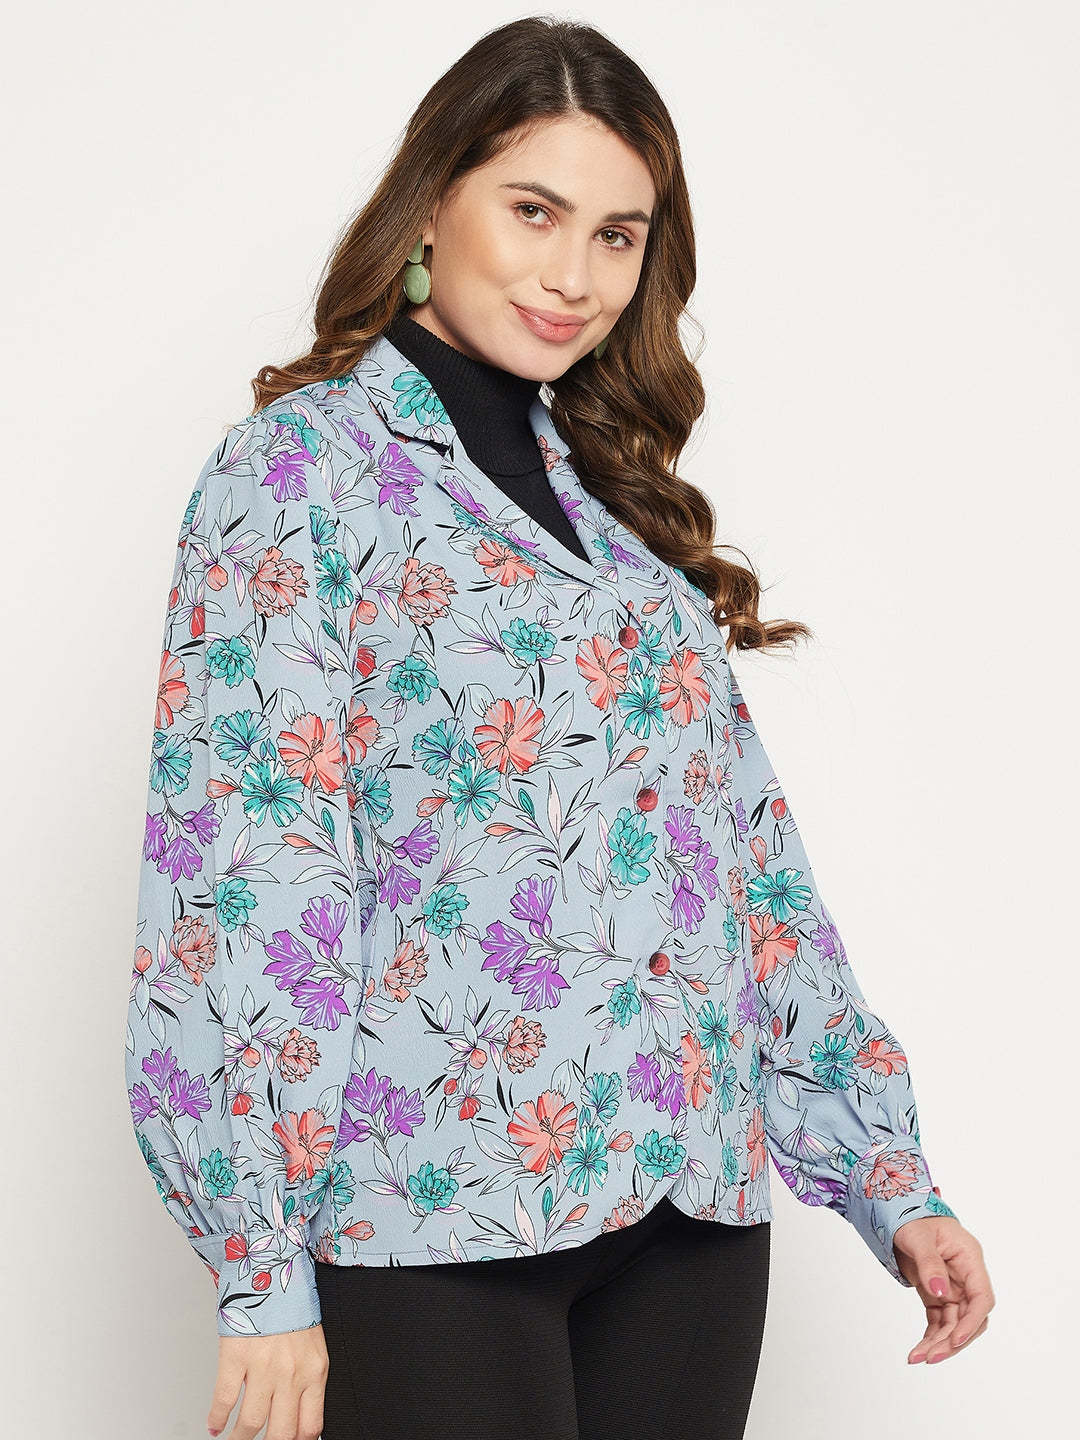 Long Sleeves Relaxed Floral Printed Casual Shirt